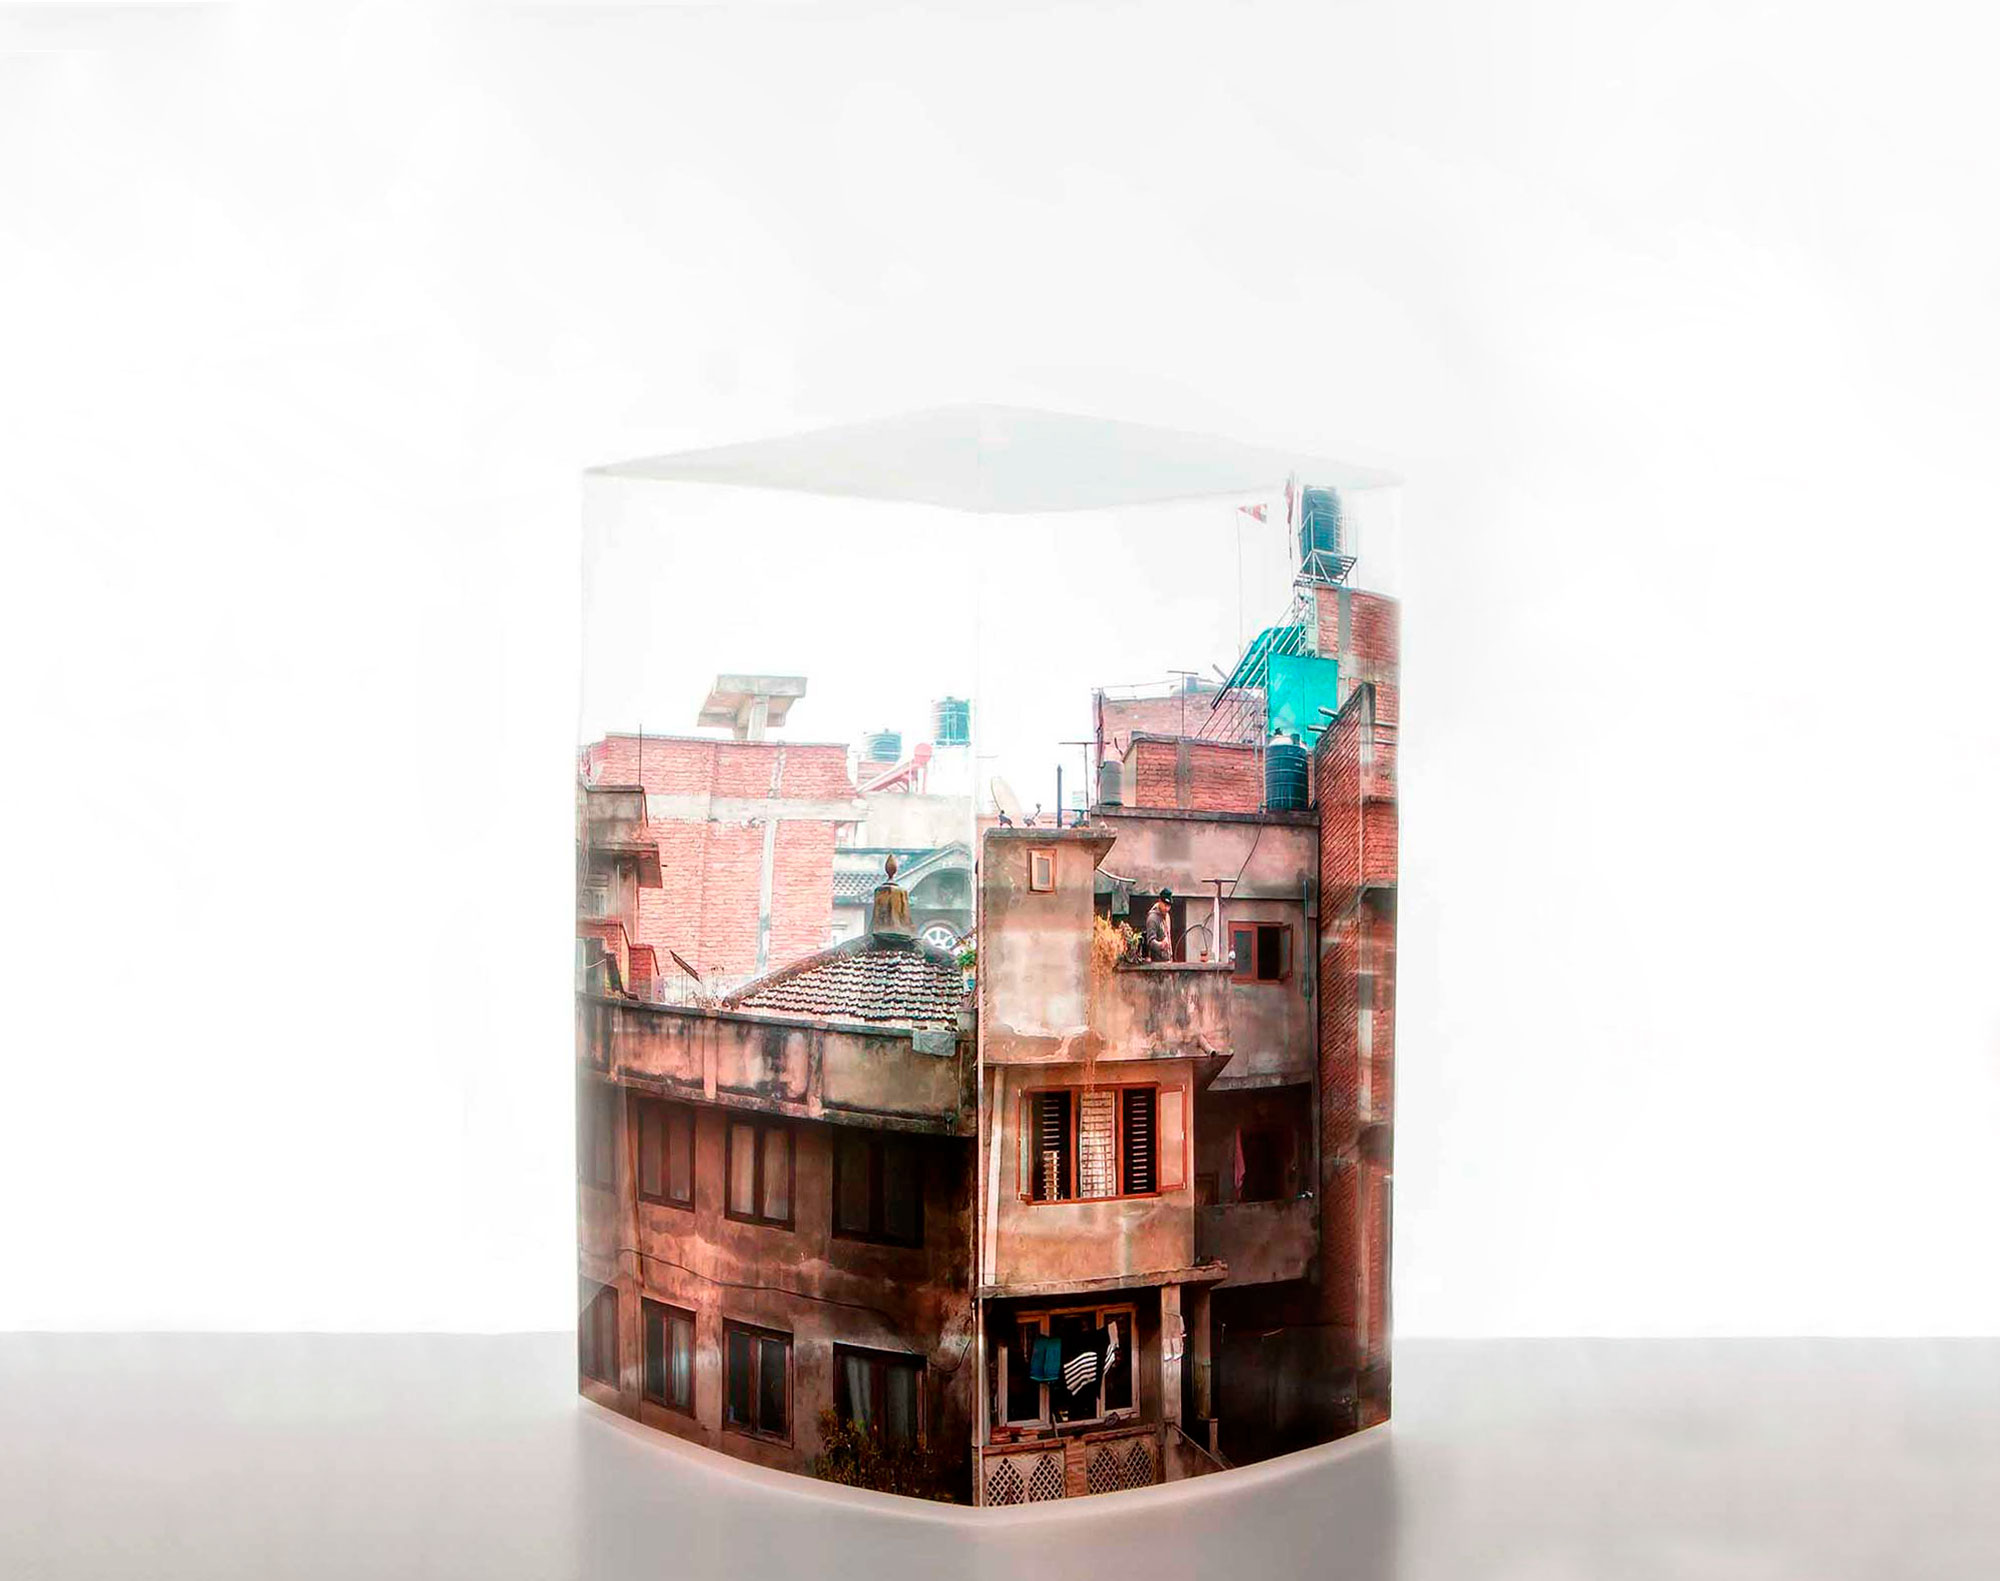 Photographic transparent sheet of Kathmandu City, Nepal, fused together to create a three-dimensional box.